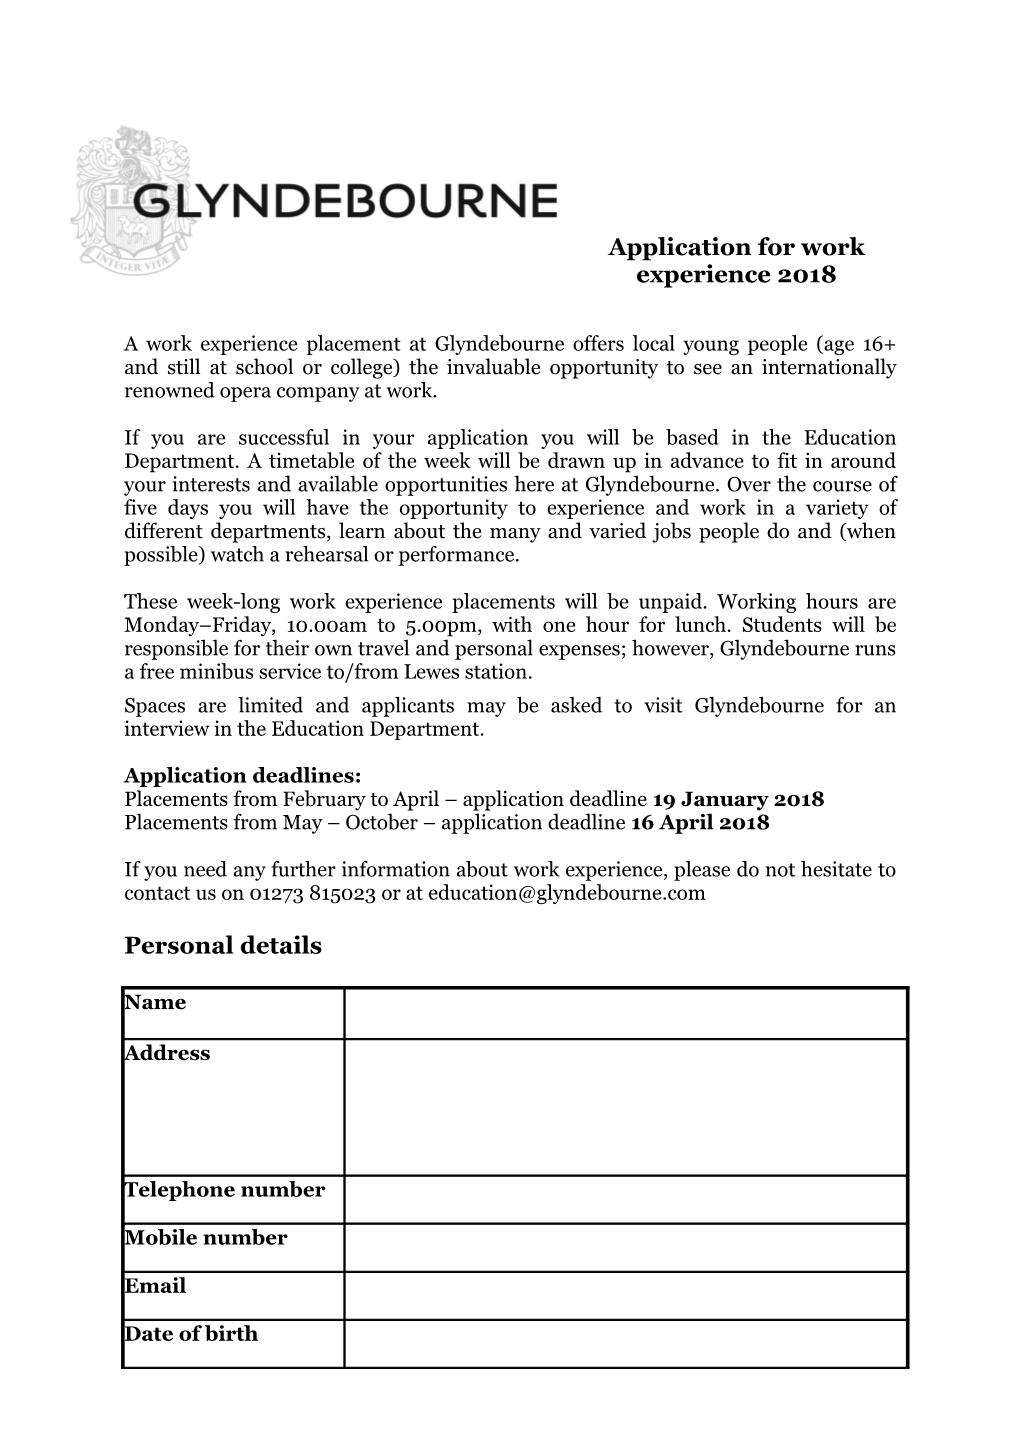 Application for Work Experience 2018